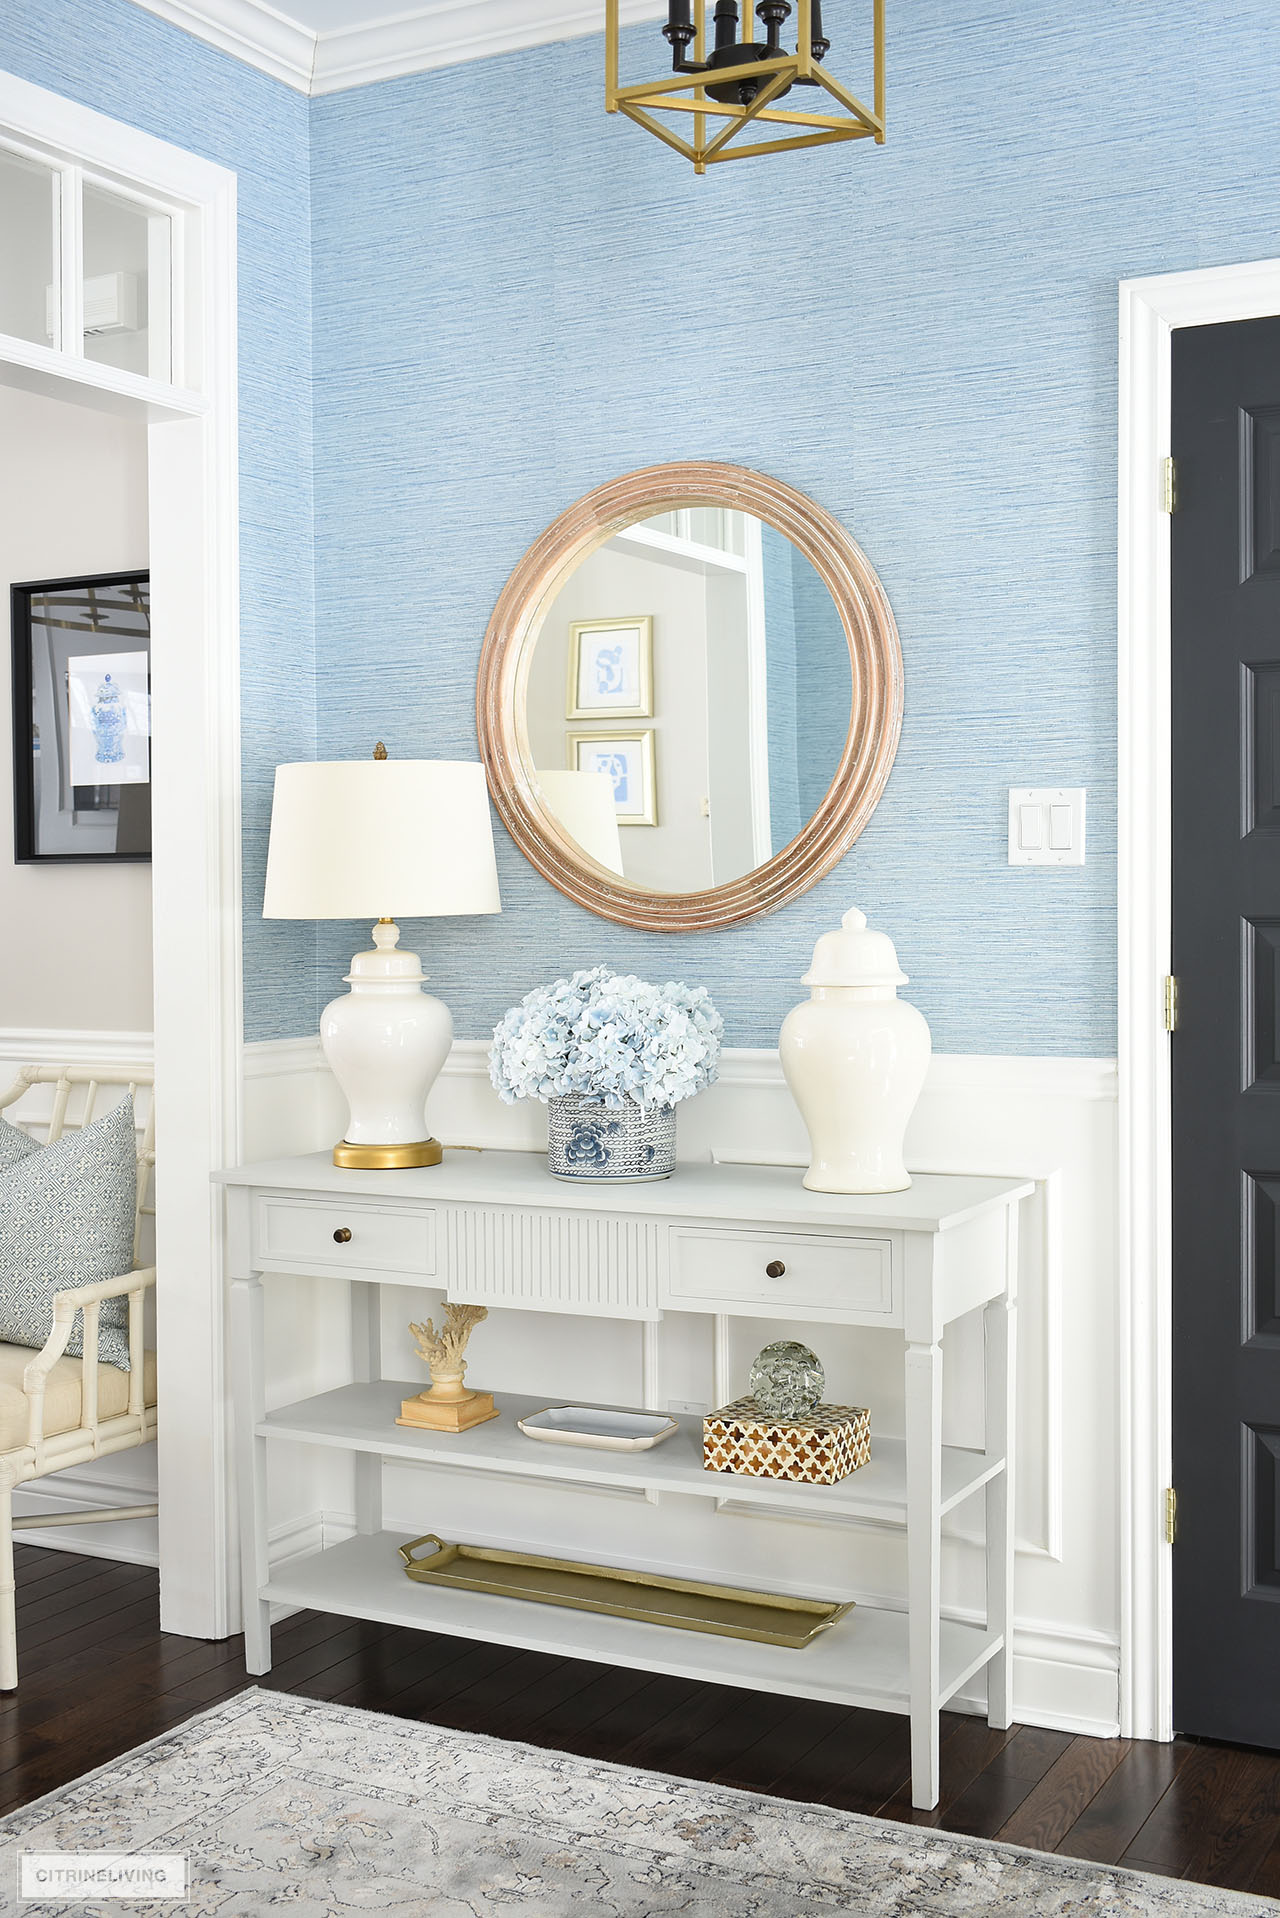 Entryway console table styled for spring with light blue and white accessories.